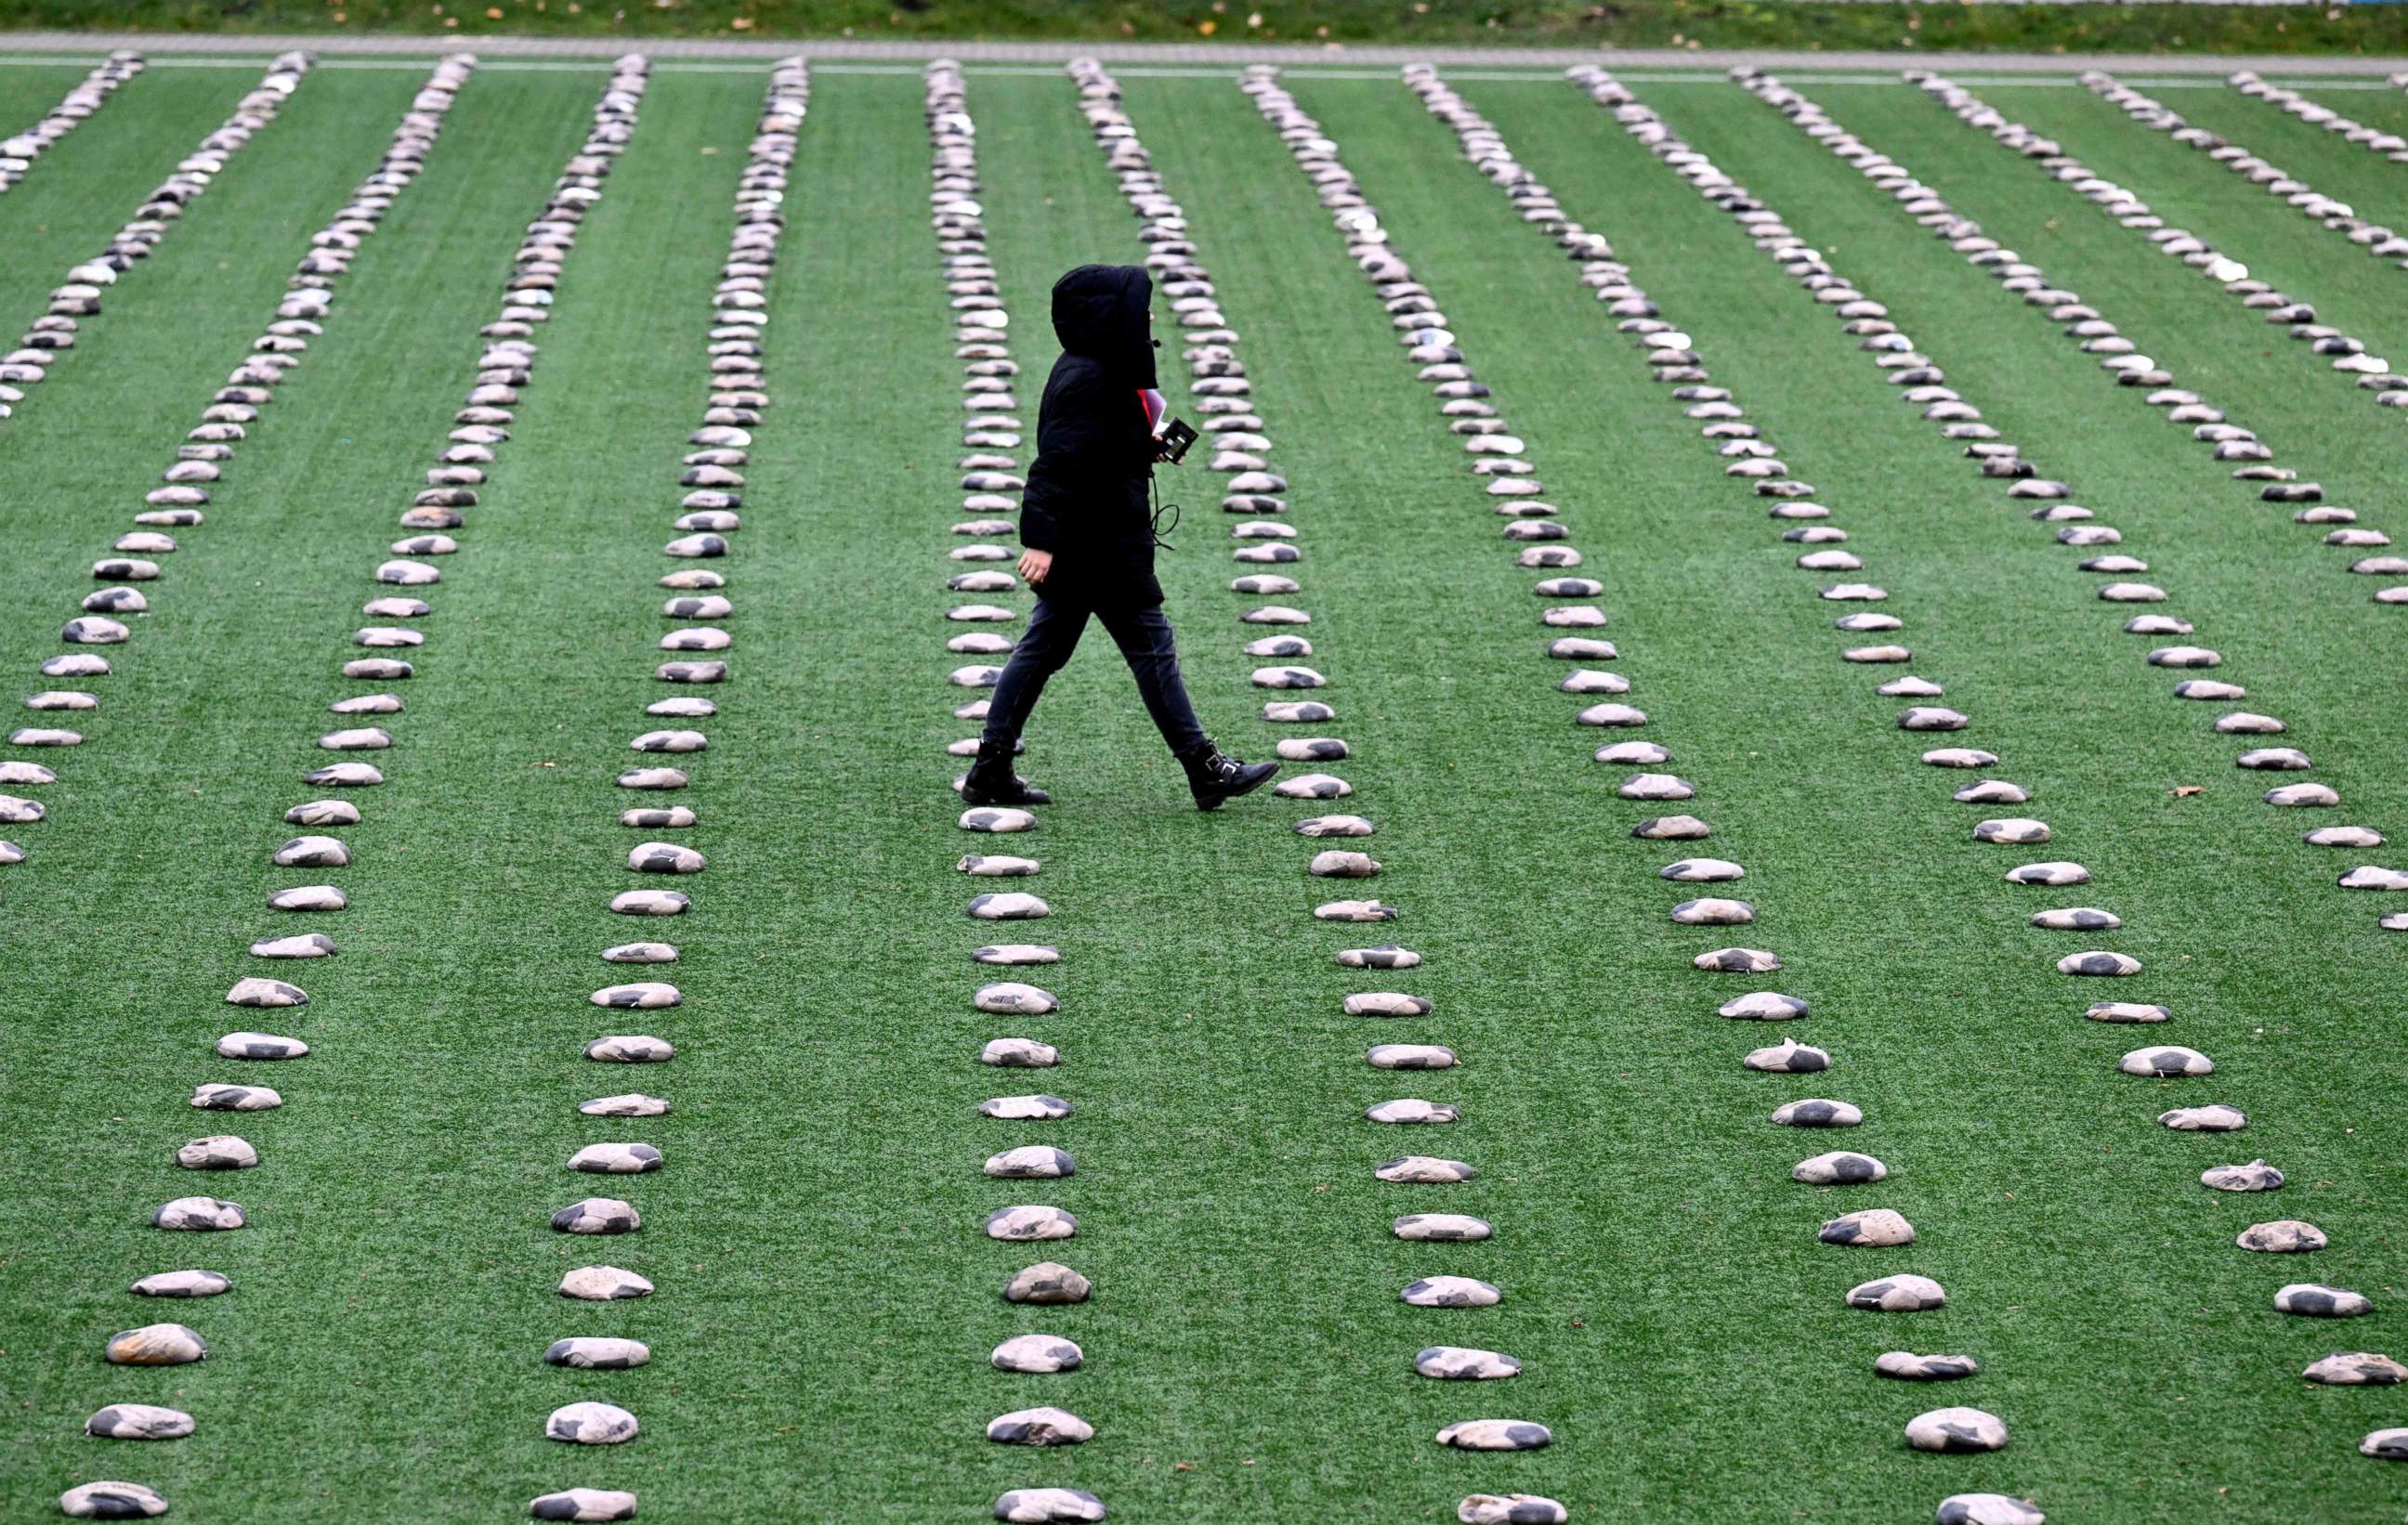 PHOTO: A woman walks between football's like sandbags installed on the pitch of stadium in Herne, western Germany, Nov. 20, 2022, during a protest in remembrance to those who died during the construction of the World Cup stadiums in Qatar.